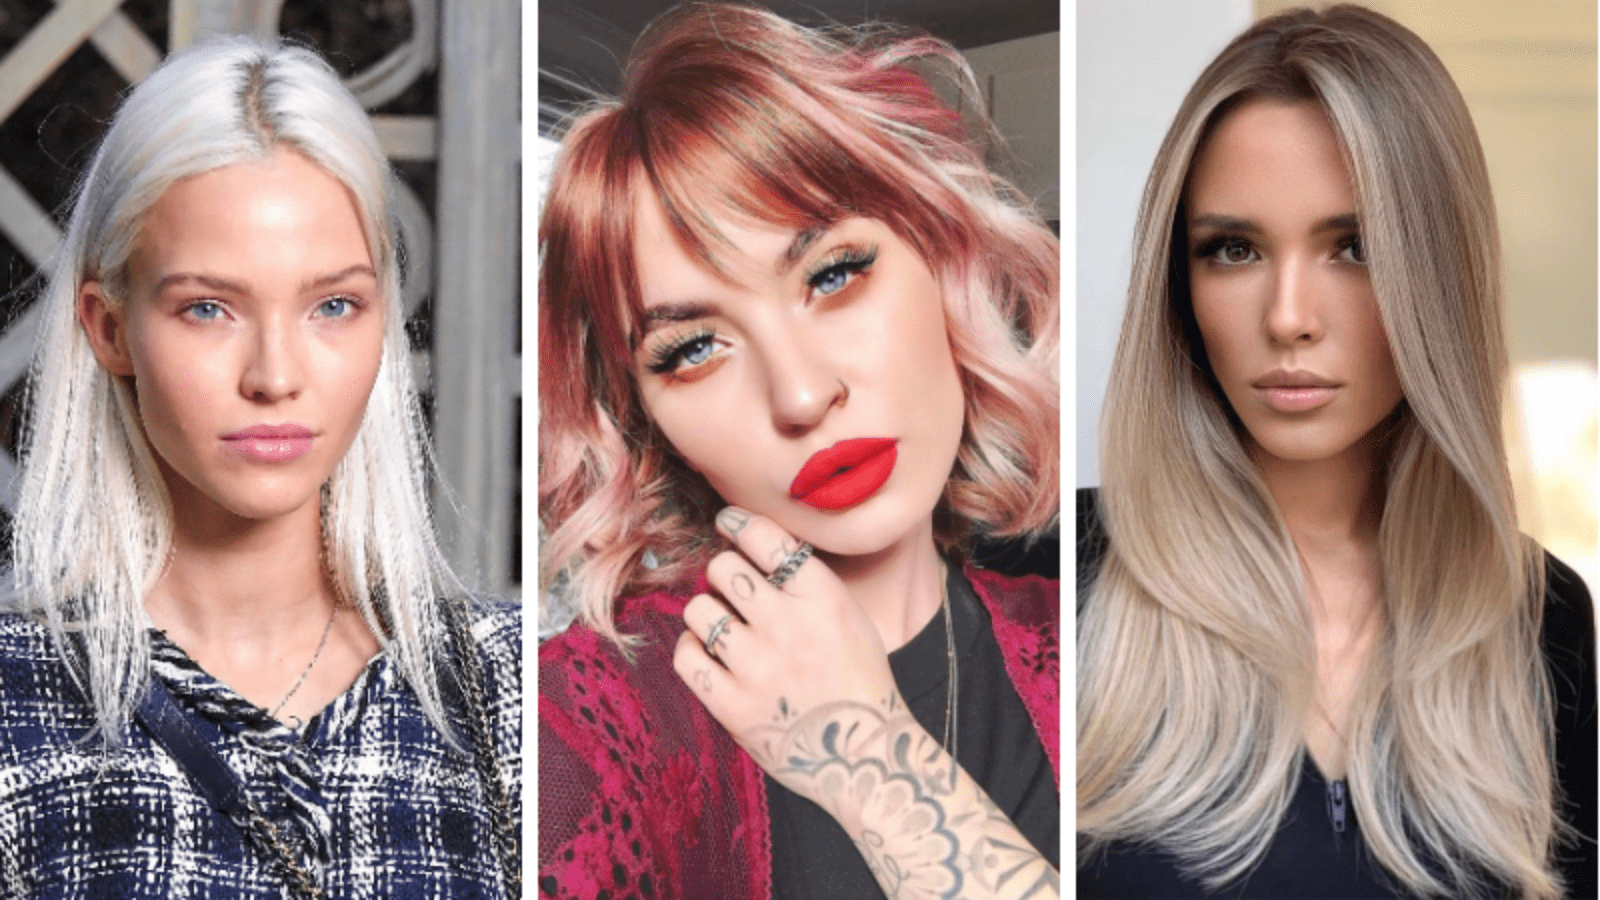 The 2021 Summer Hair Color Trends that are Taking over! | El-Shai